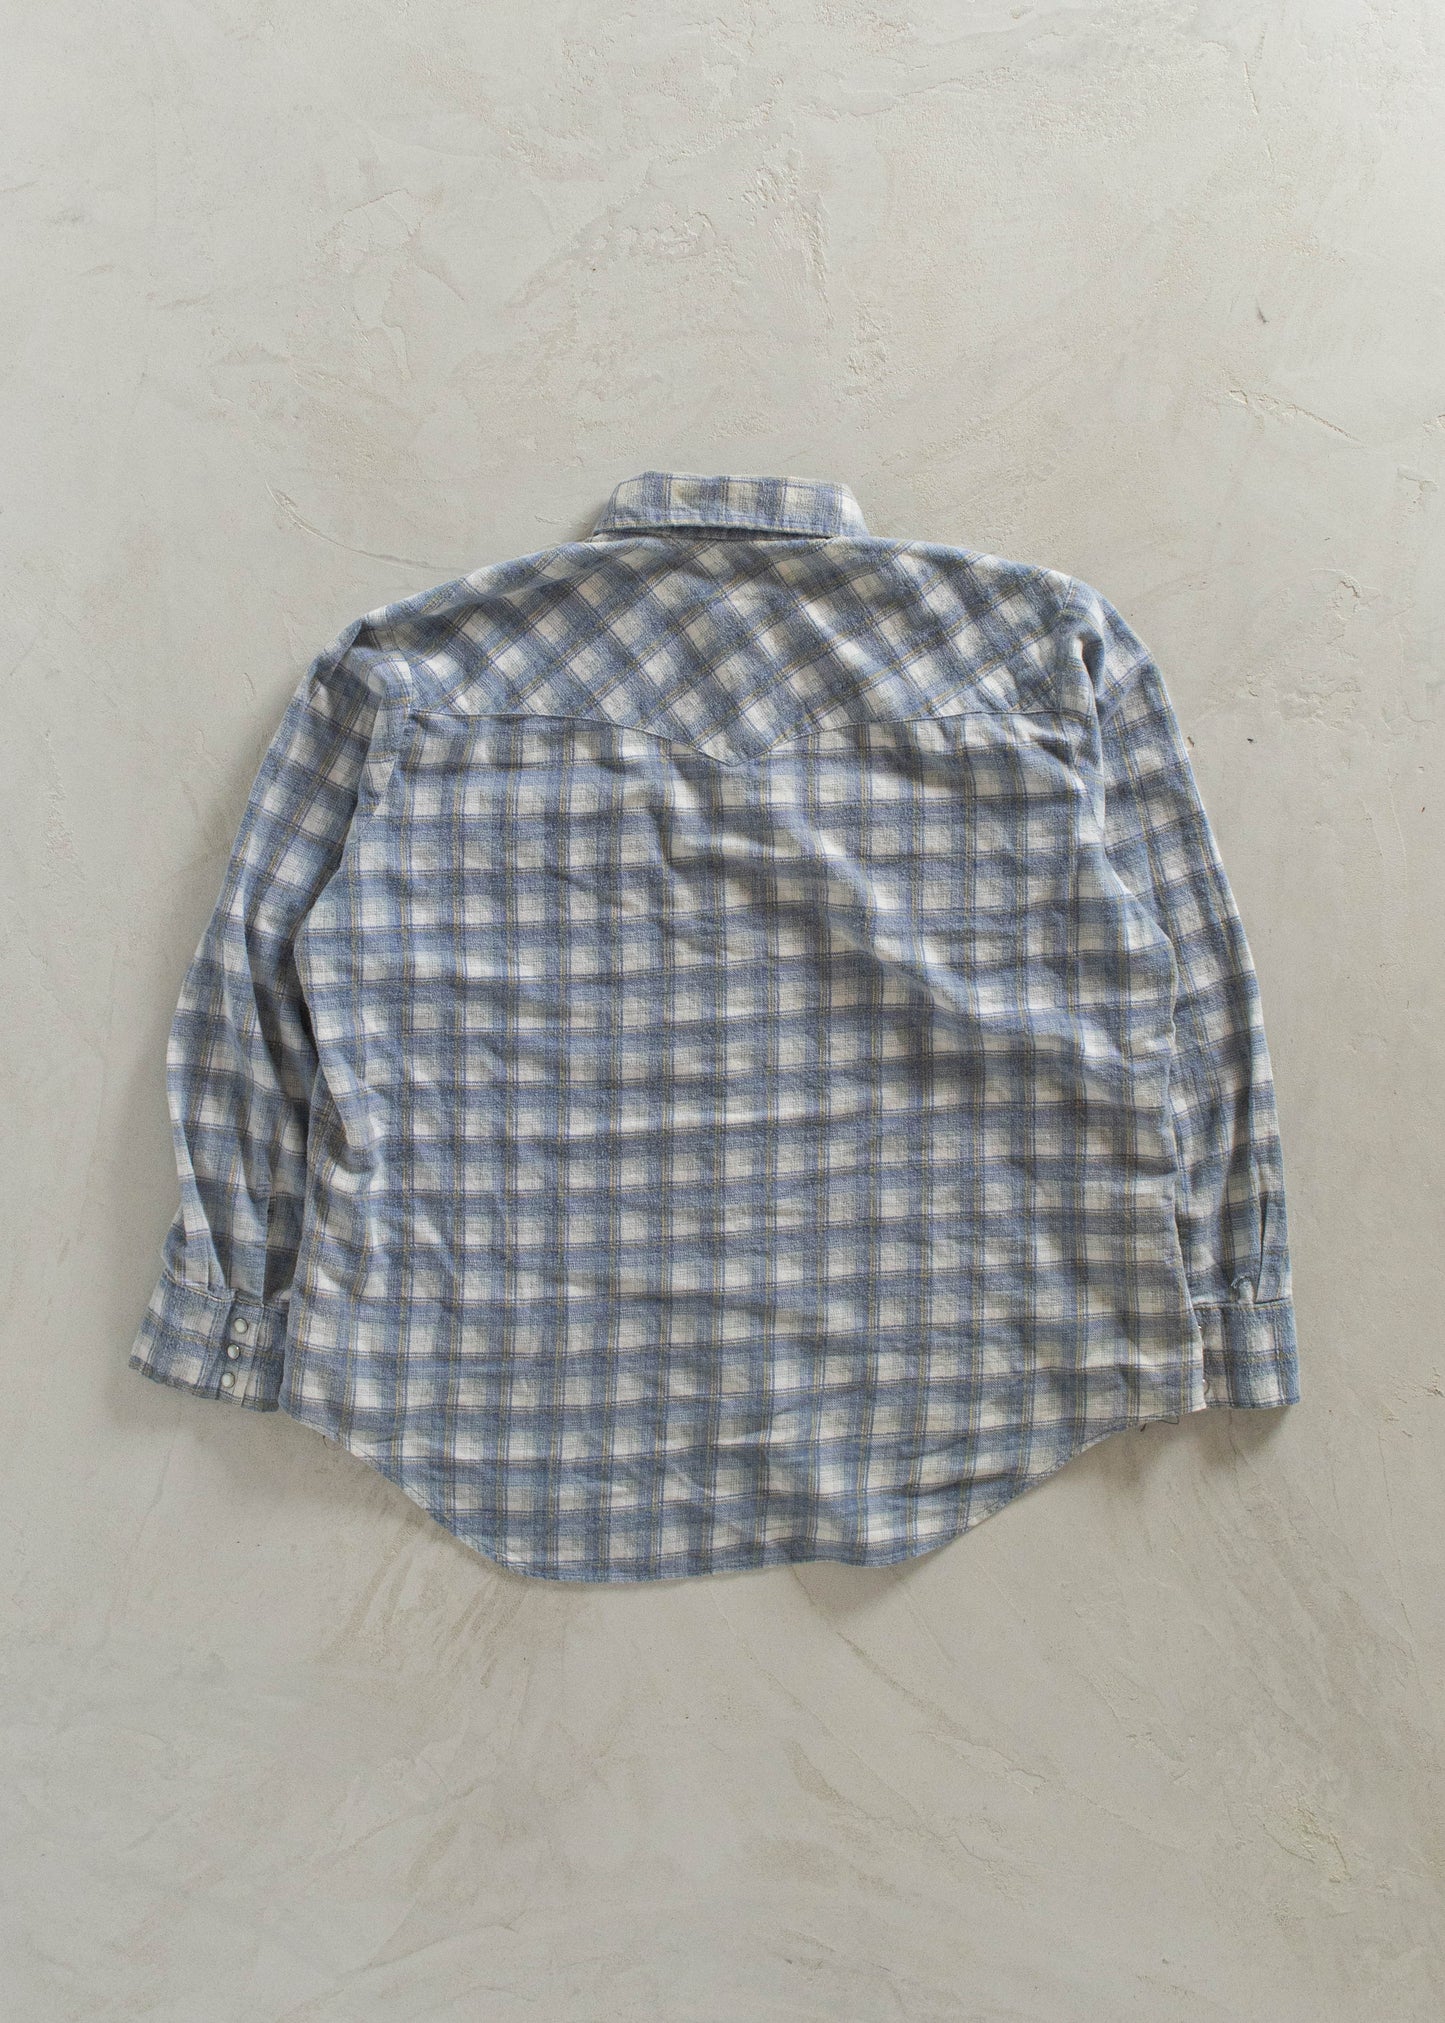 1980s Fruit of The Loom Cotton Flannel Button Up Shirt Size M/L